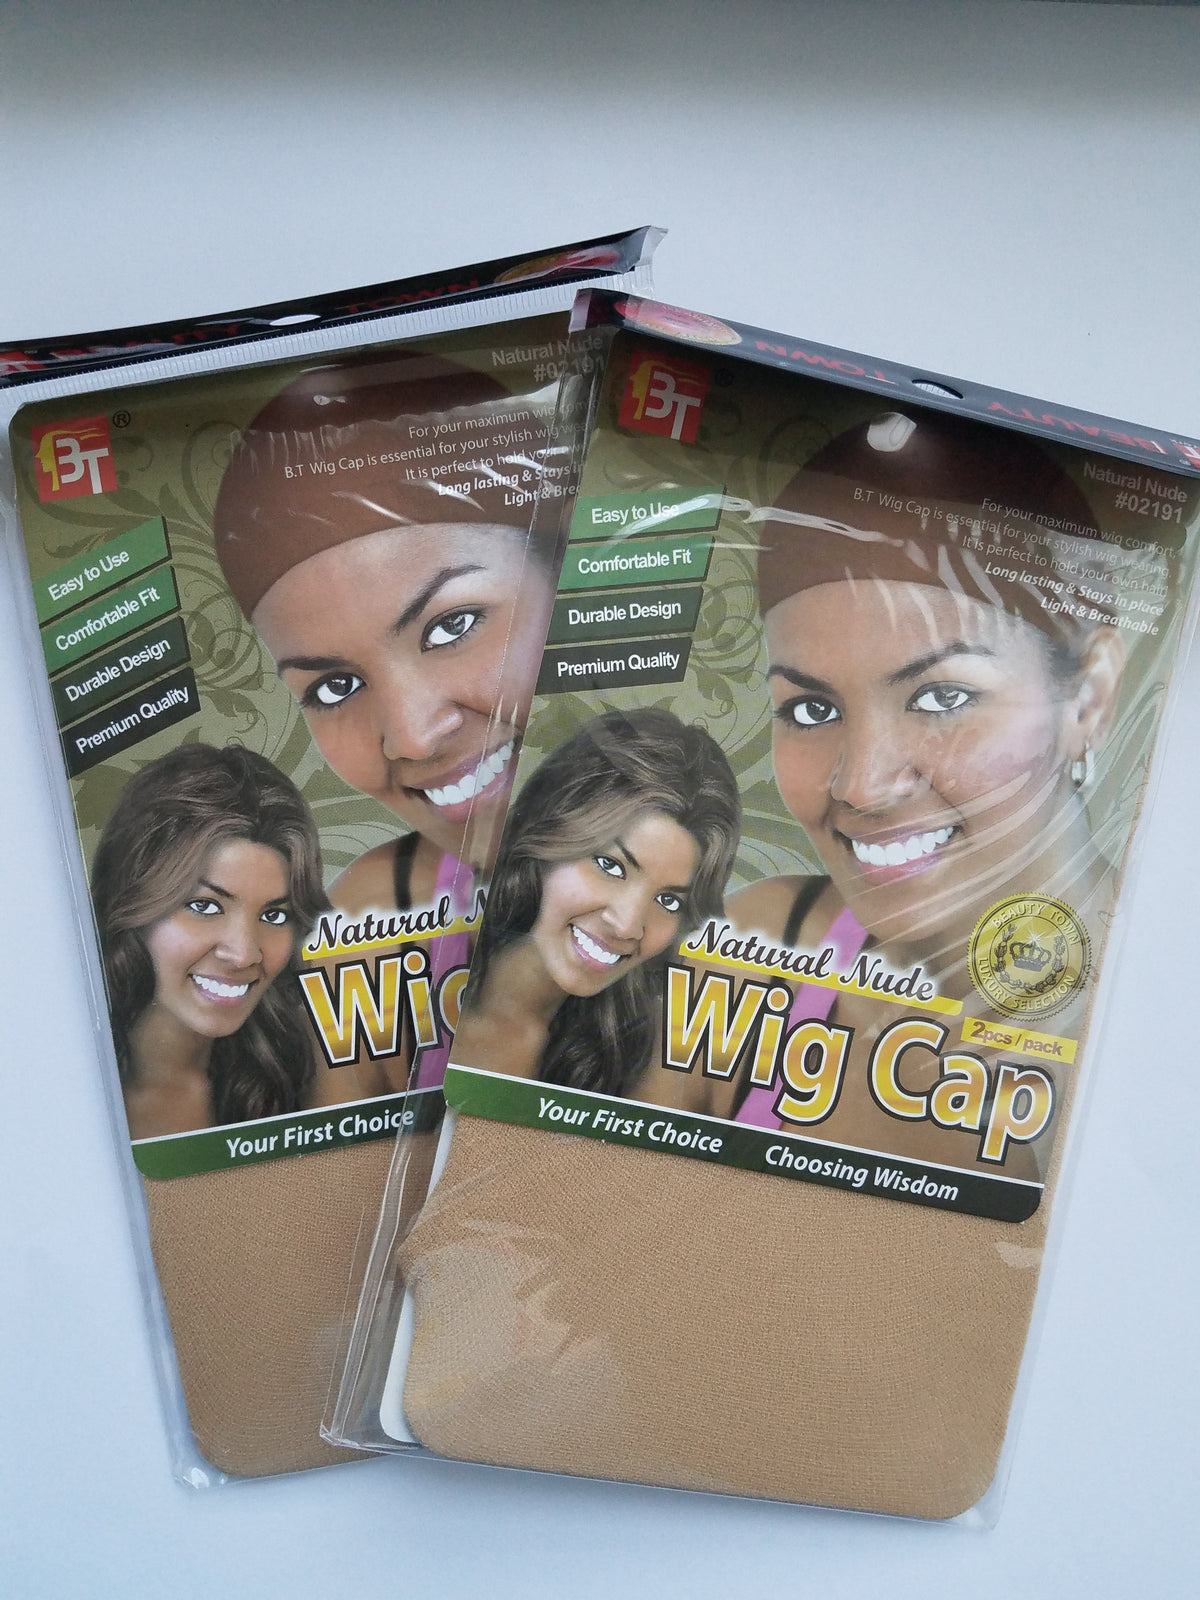 Stocking Wig Cap Natural Nude 2 Packs - Elise Beauty Supply